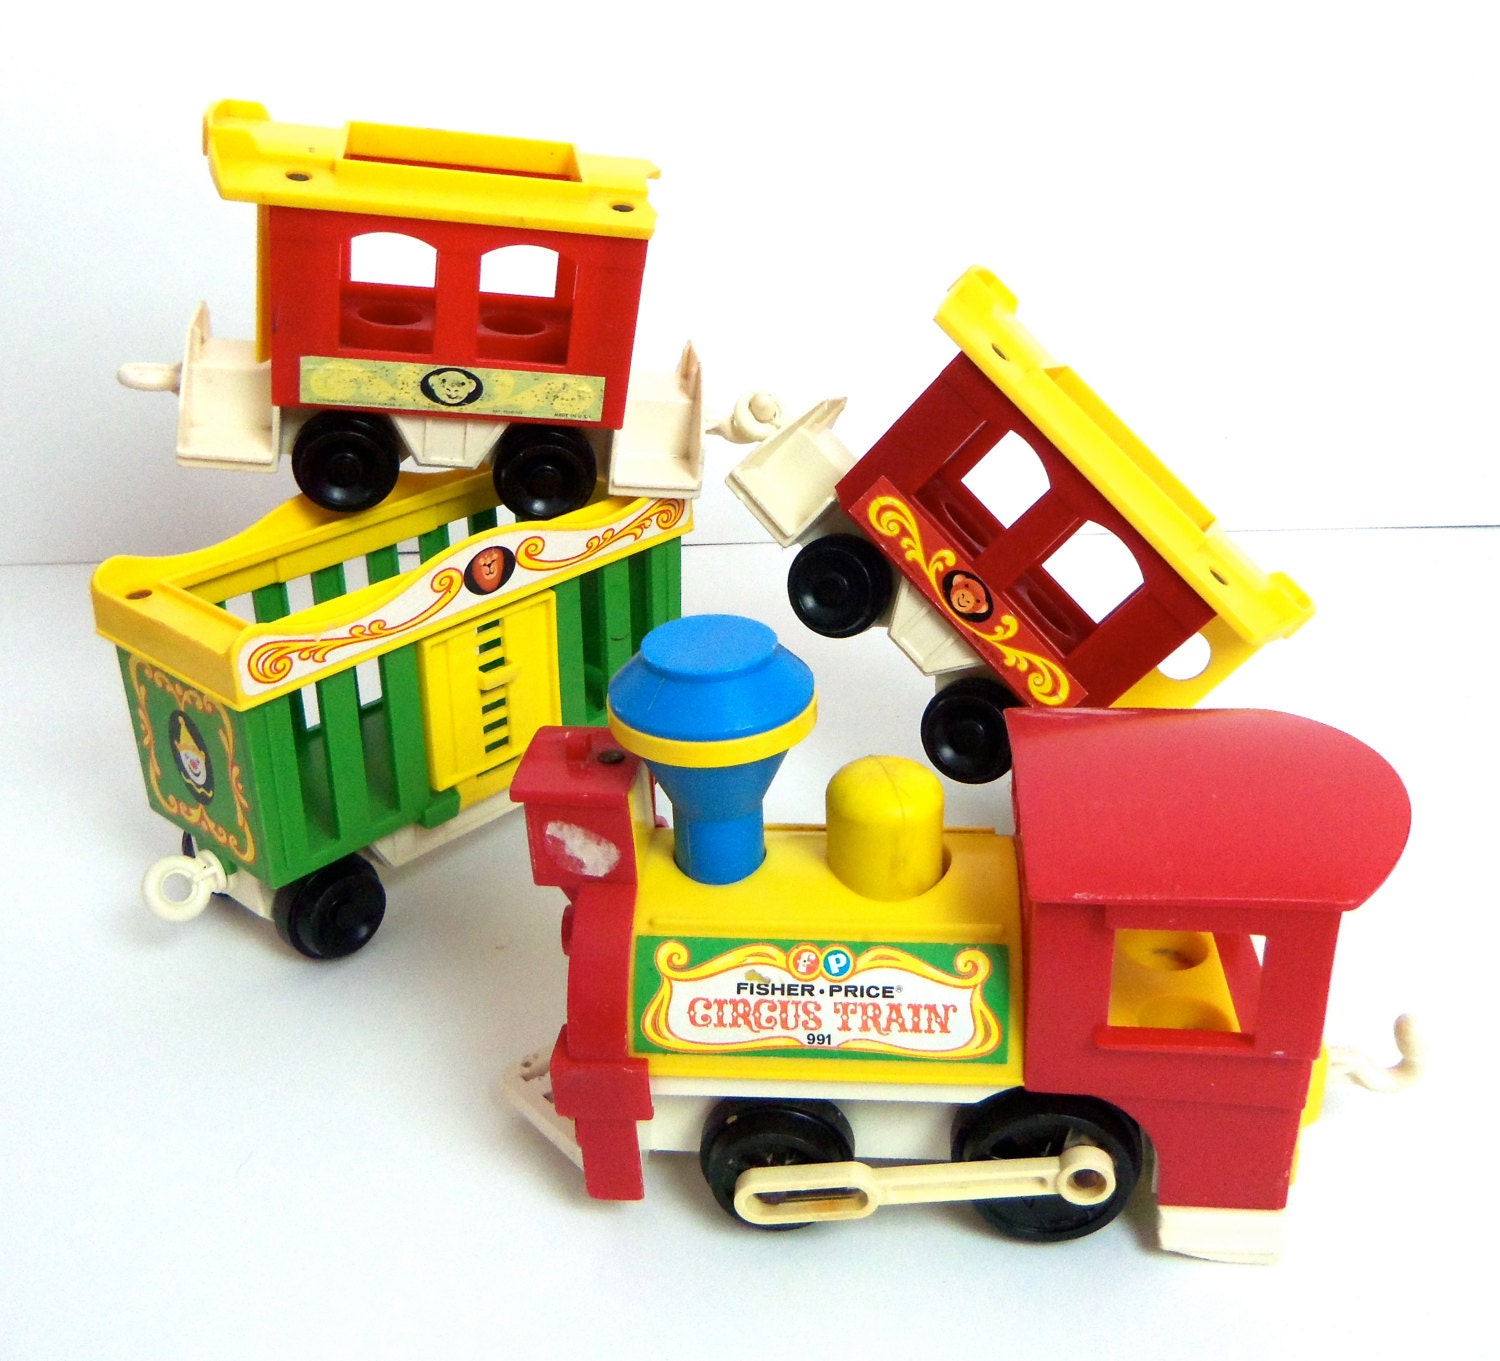 1973 Fisher Price Circus Train no. 991 4 pc engine by